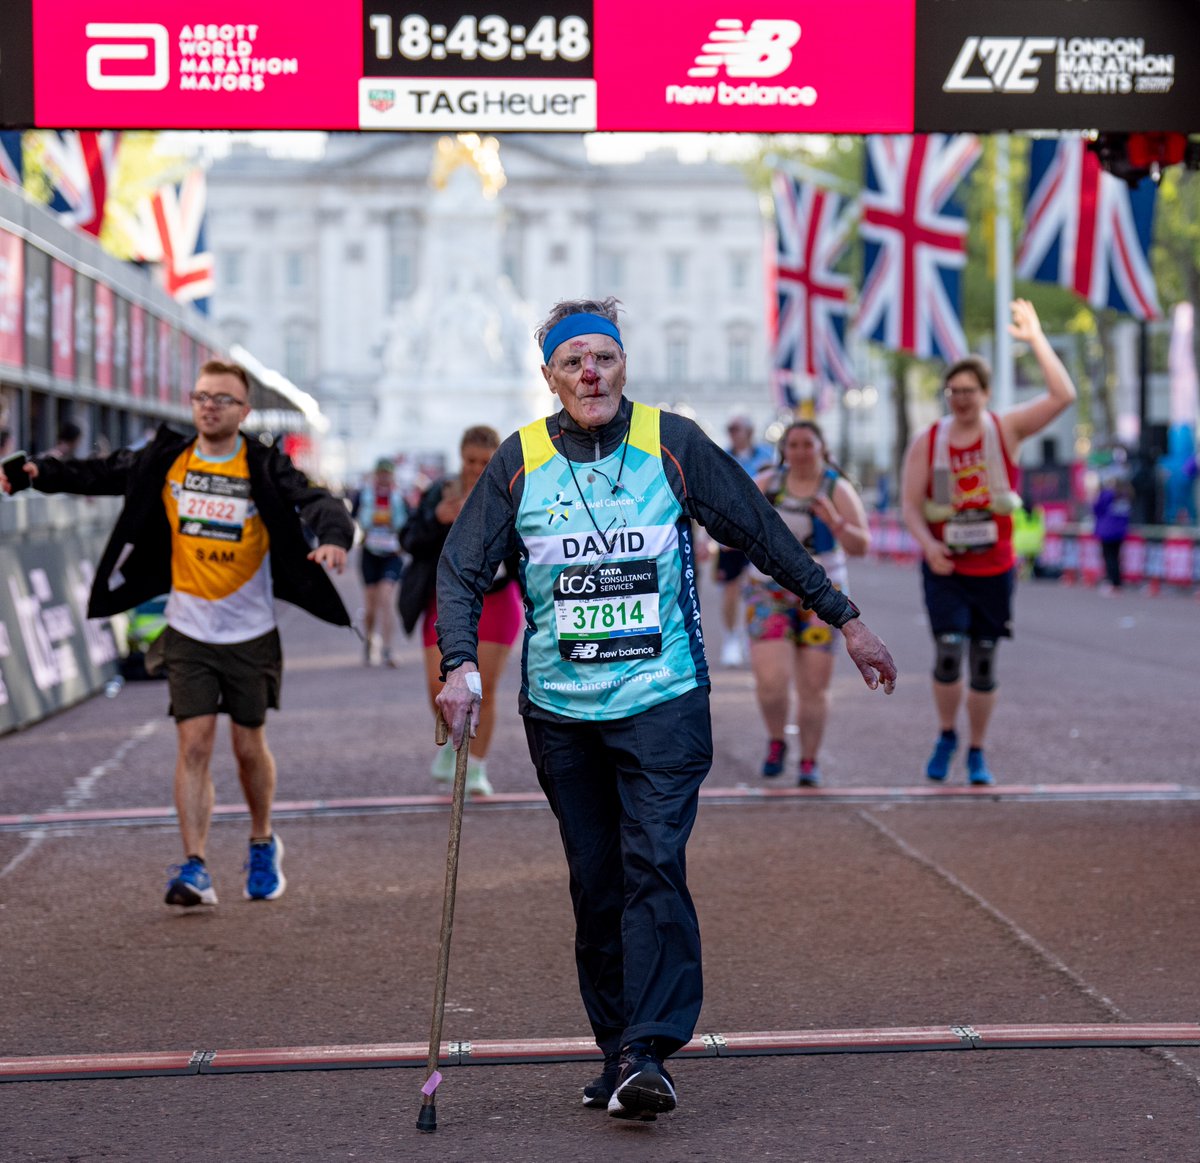 An amazing story at the London Marathon 🙏 David Picksley, with the help of a walking stick, completed the 26.2 mile course in an amazing 7:57:15 🇬🇧 The 91-year-old finished on Sunday despite falling on a bump in the road at 15 miles and suffering a bloody nose 🤯 📸